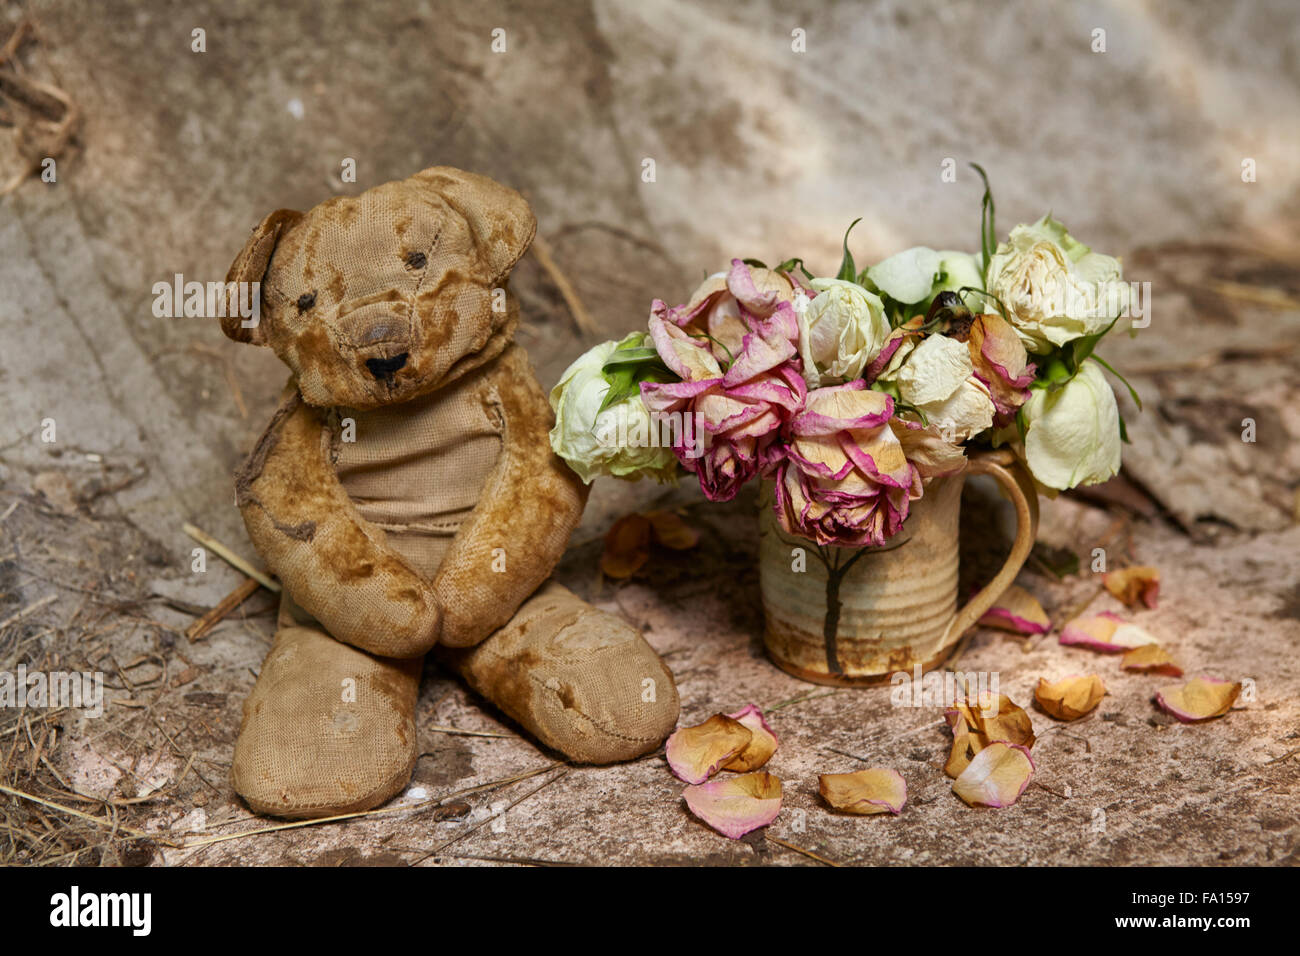 Vintage teddy bear with faded roses in a grungy setting Stock Photo